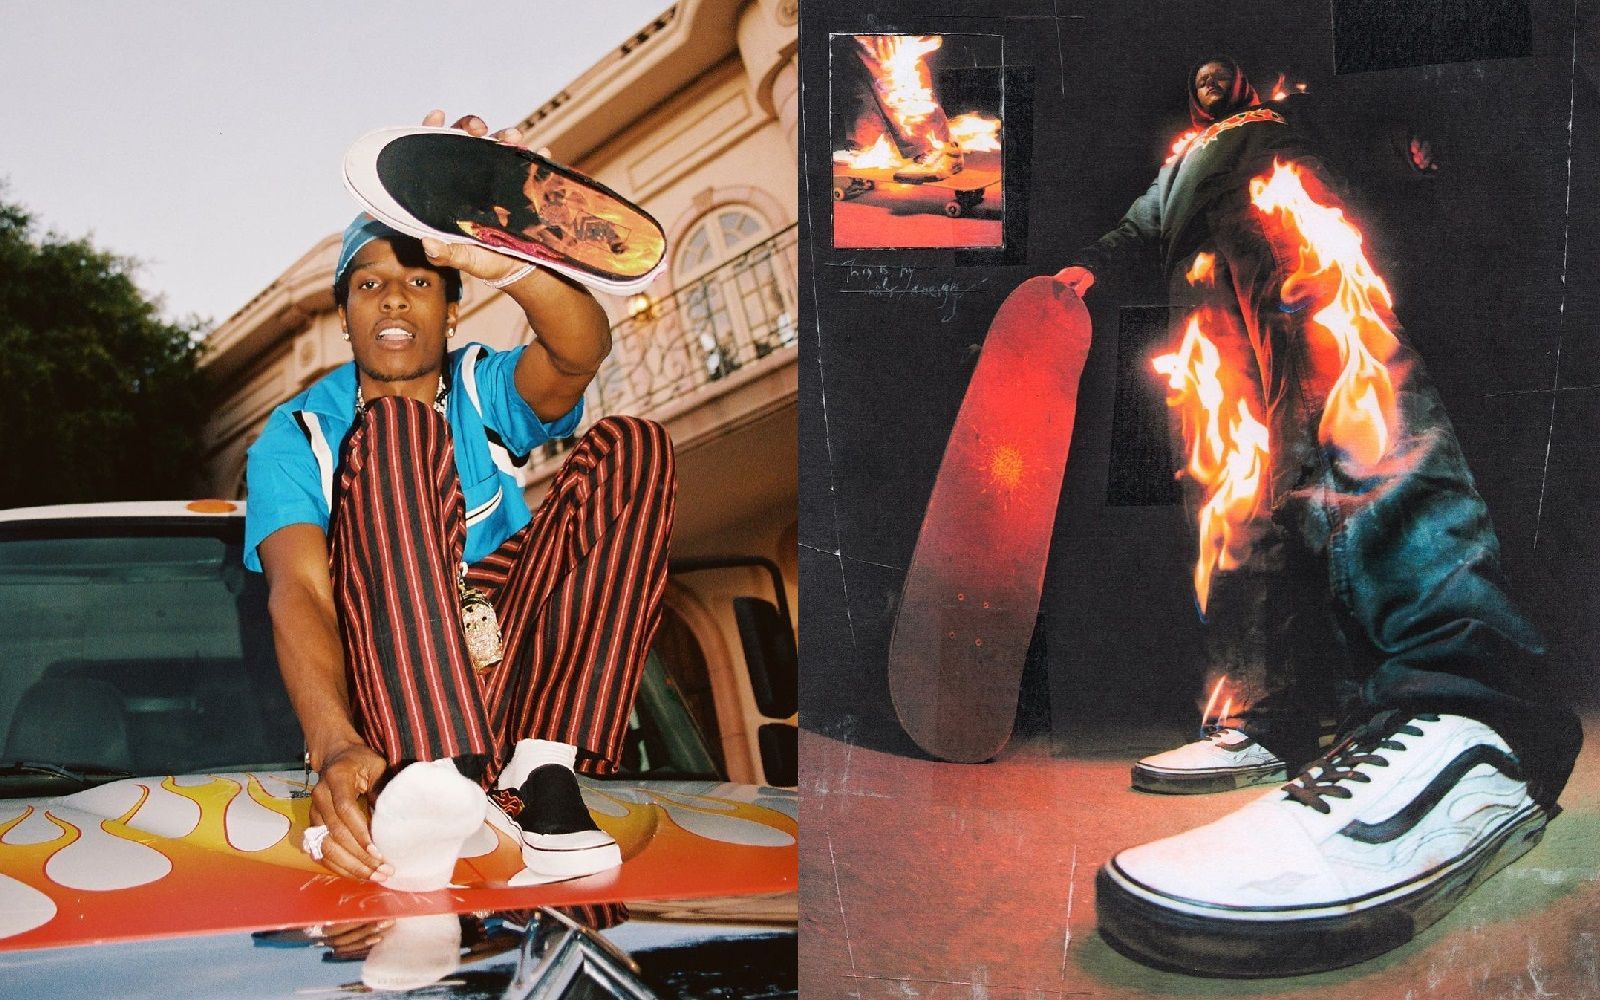 ASAP Rocky Updates His Favorite Vans Styles In New Collab